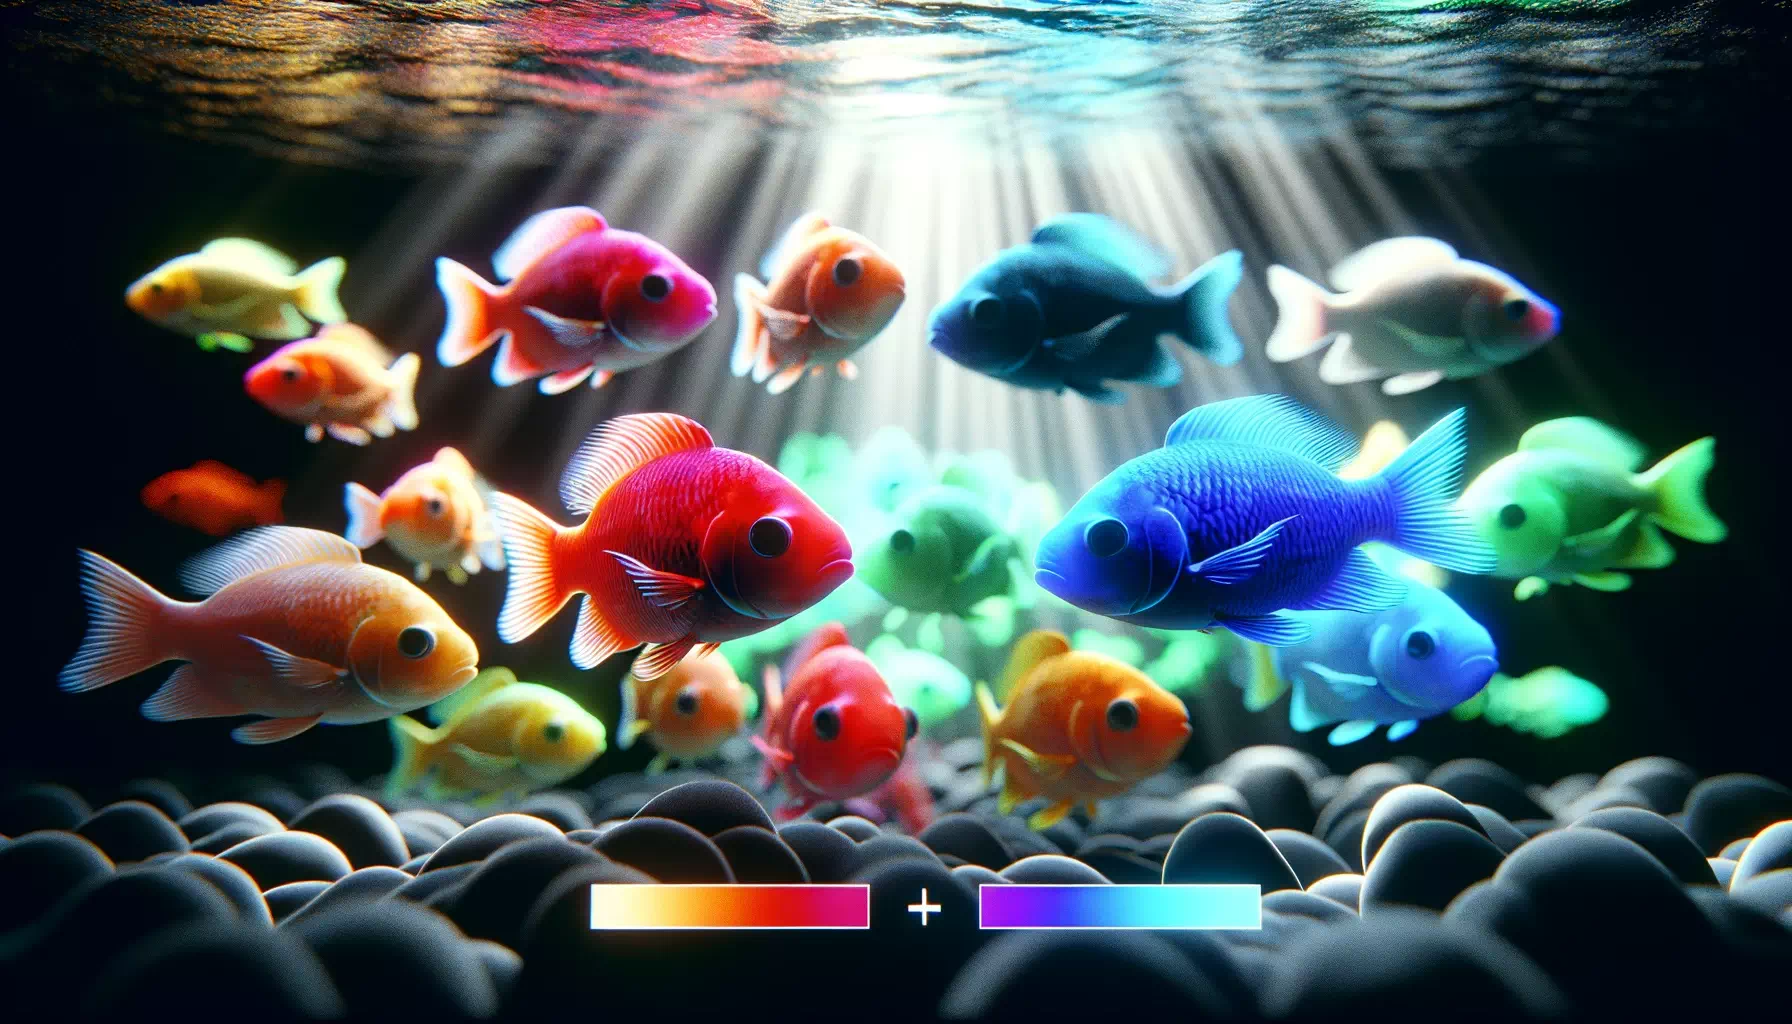 showing GloFish in an aquarium, with some exhibiting signs of color fading, symbolizing color-related health implications. The image sh